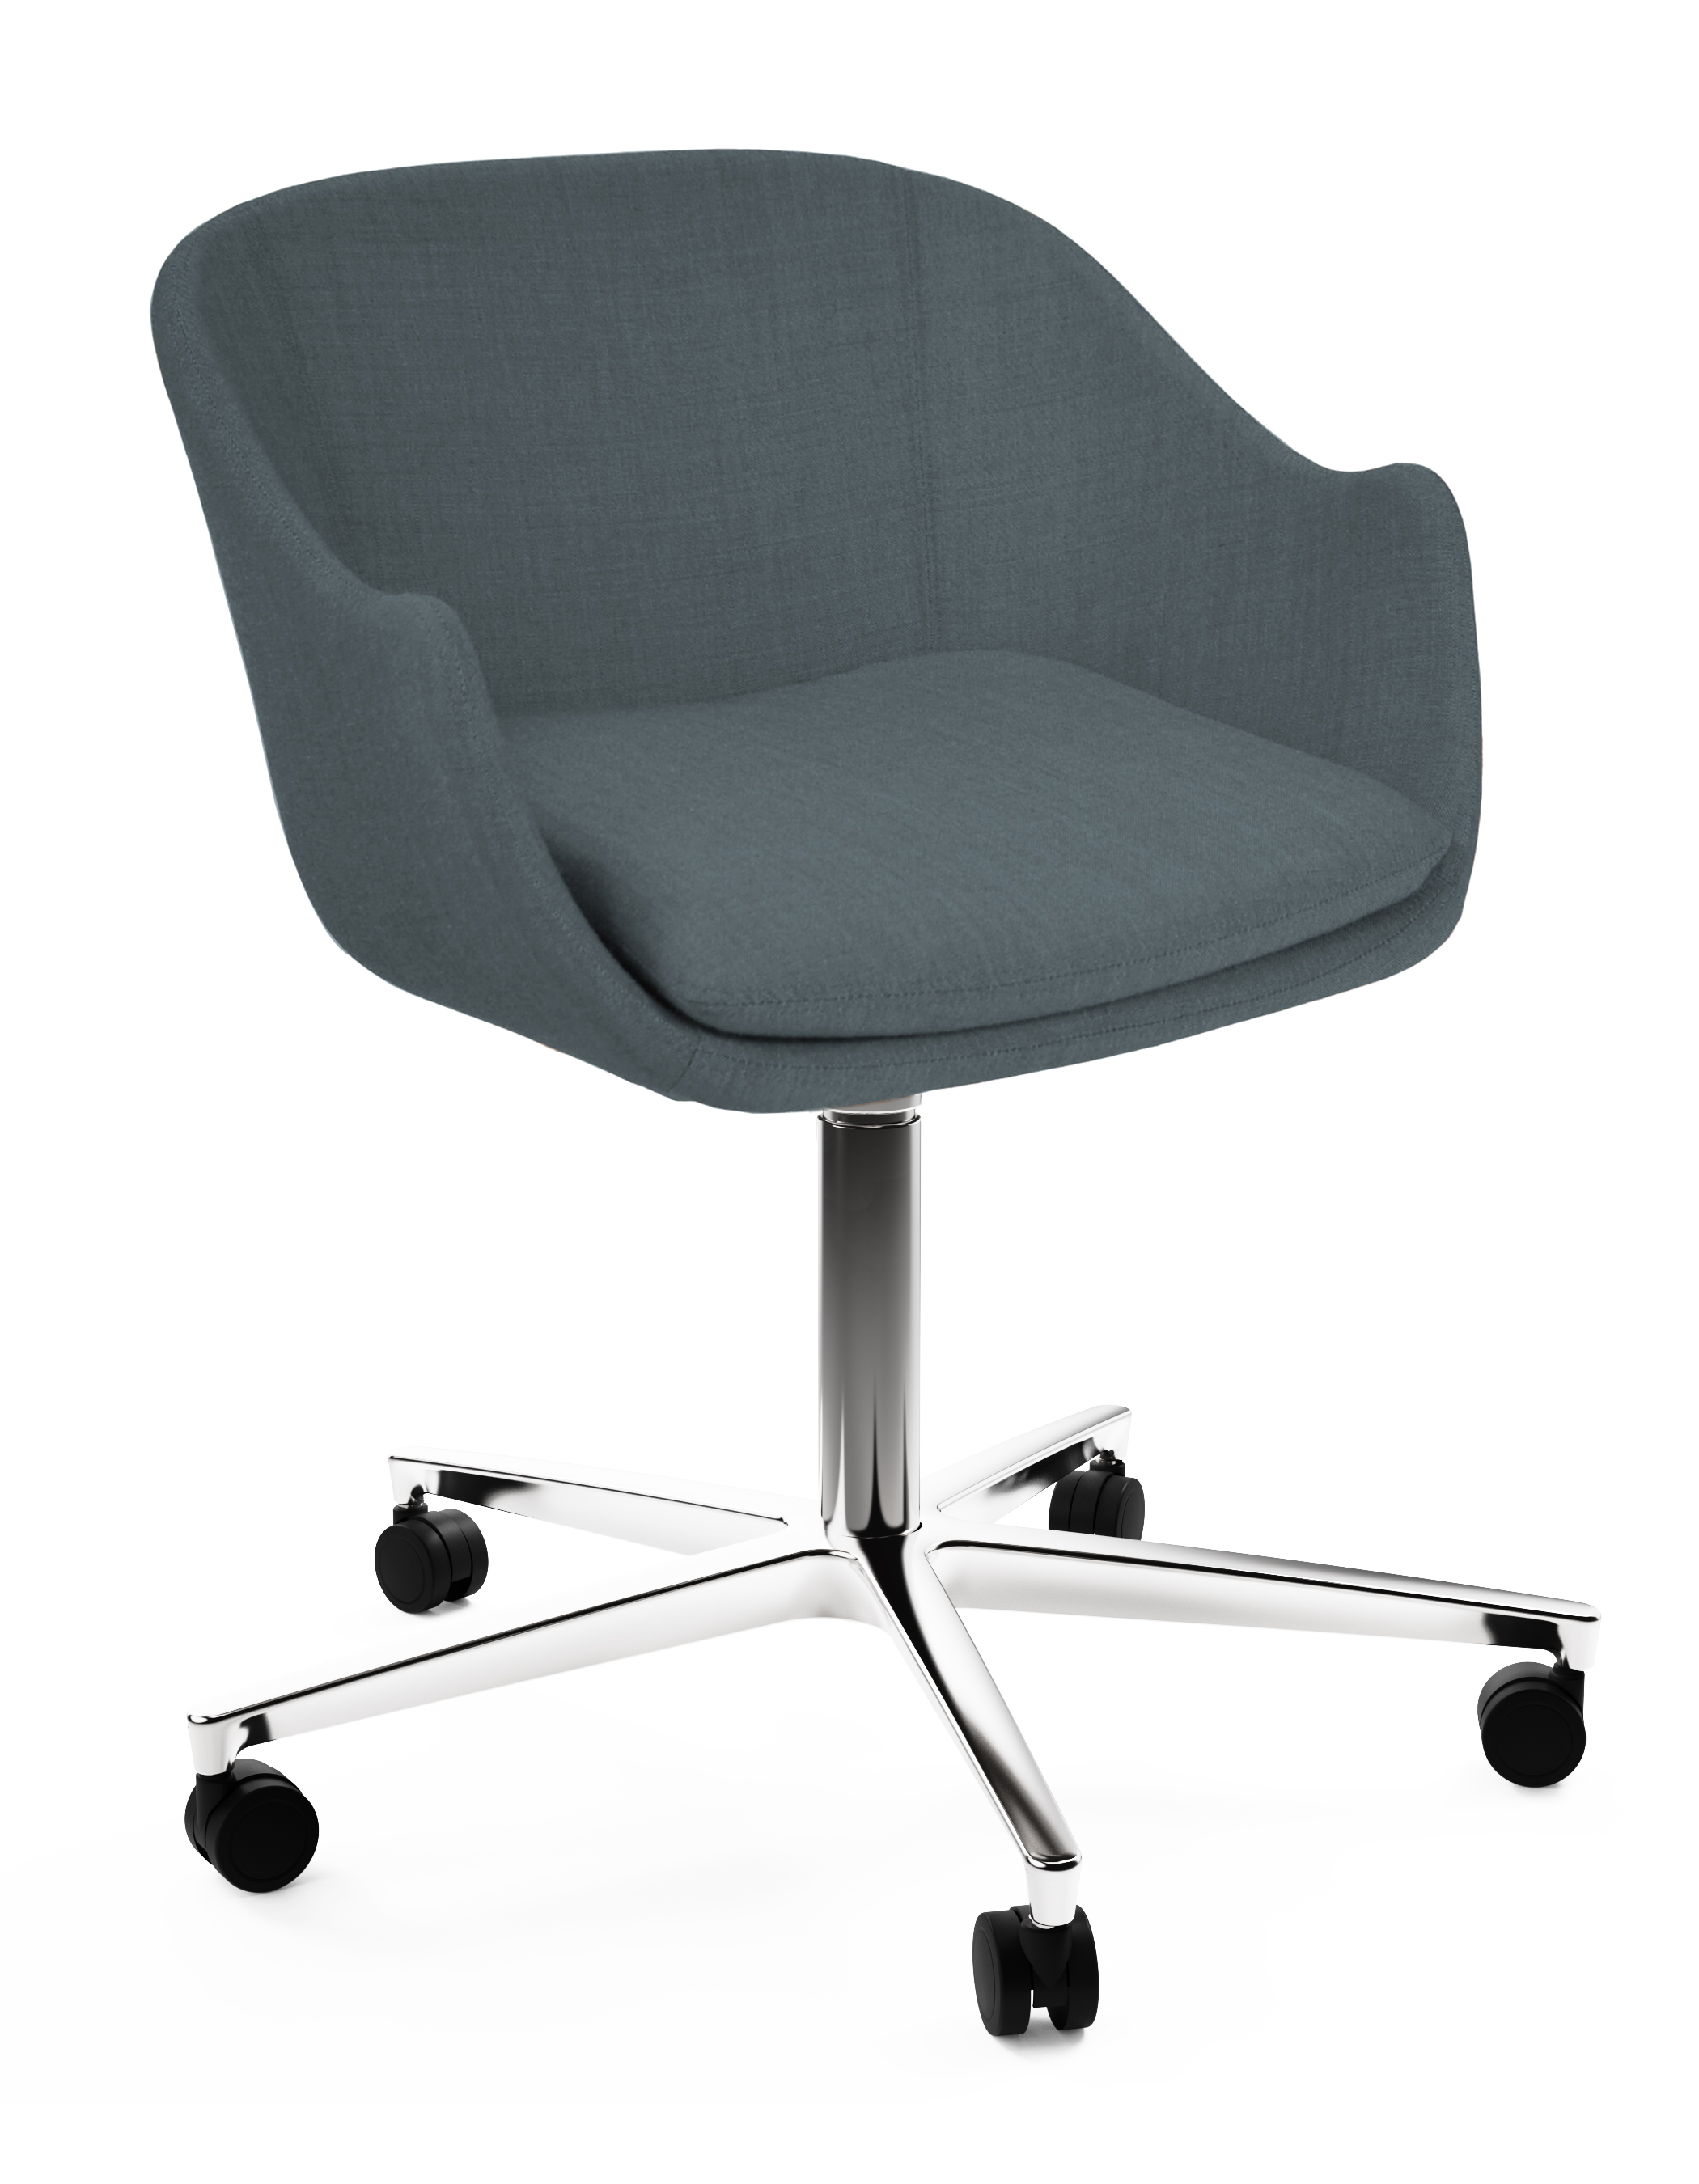 WS - Noir chair - 5 star castor polished base (Front angle)